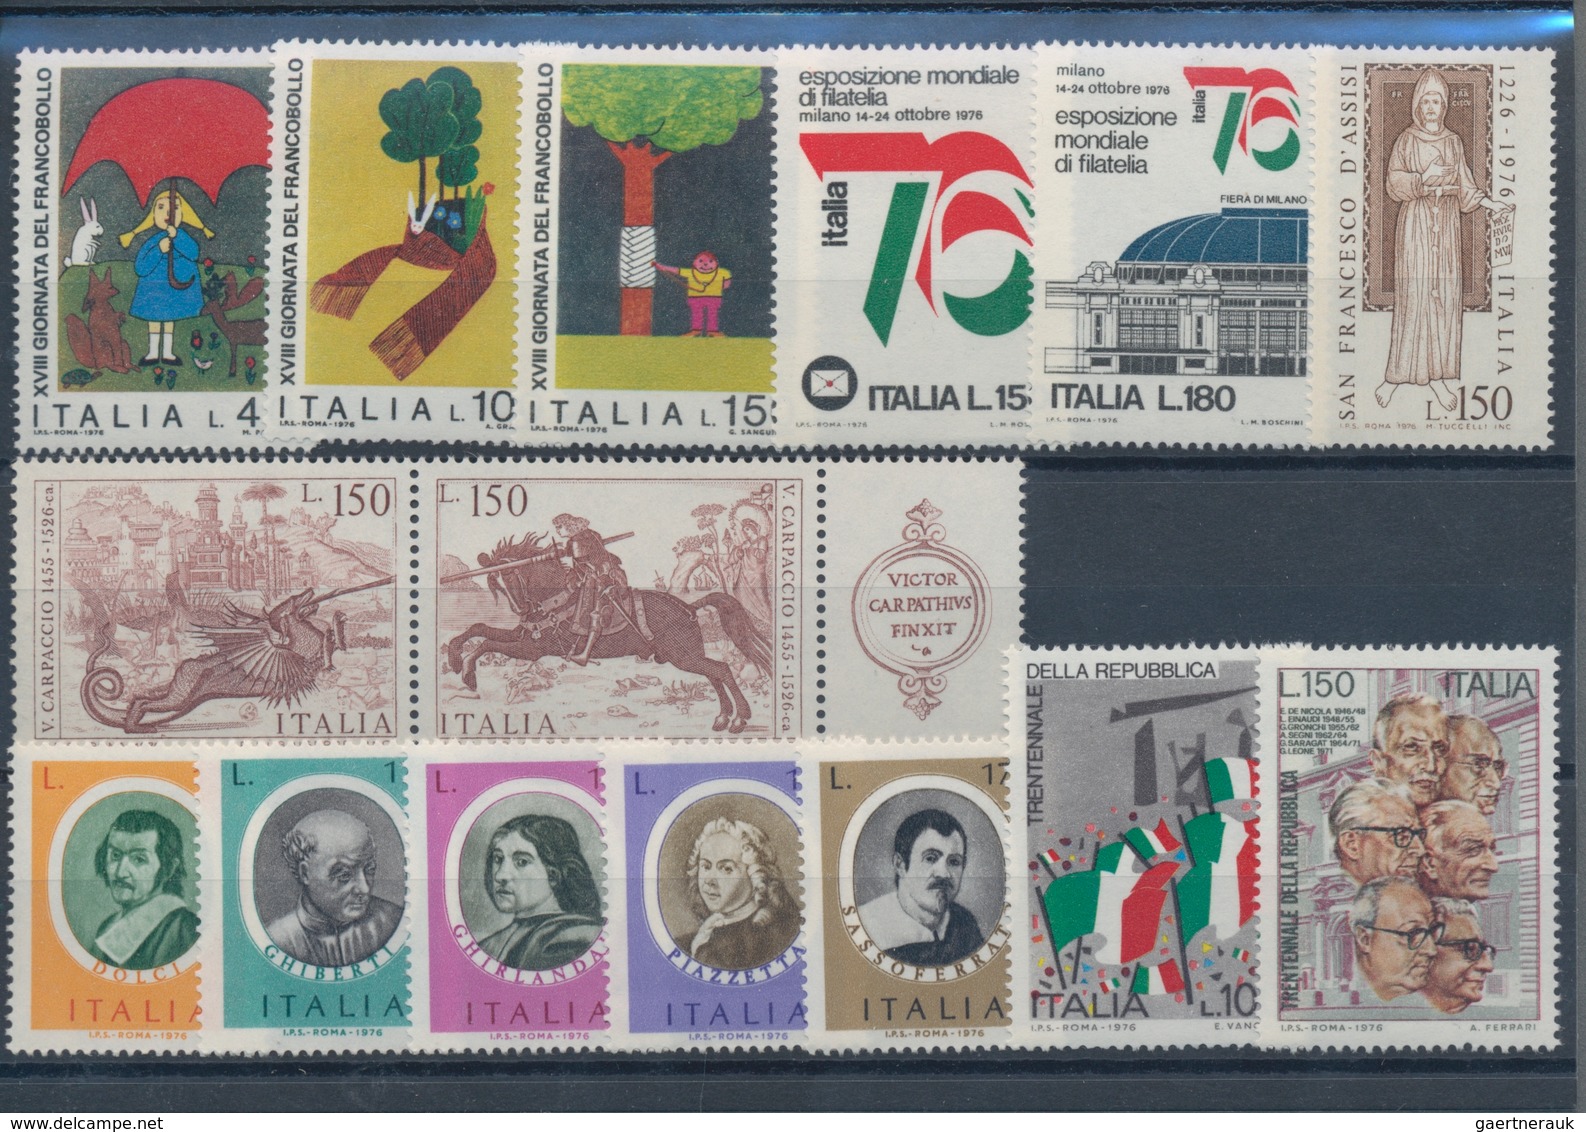 Italien: 1970/1979, year sets MNH per 100, seem to be complete. Every year set is sorted on stockcar